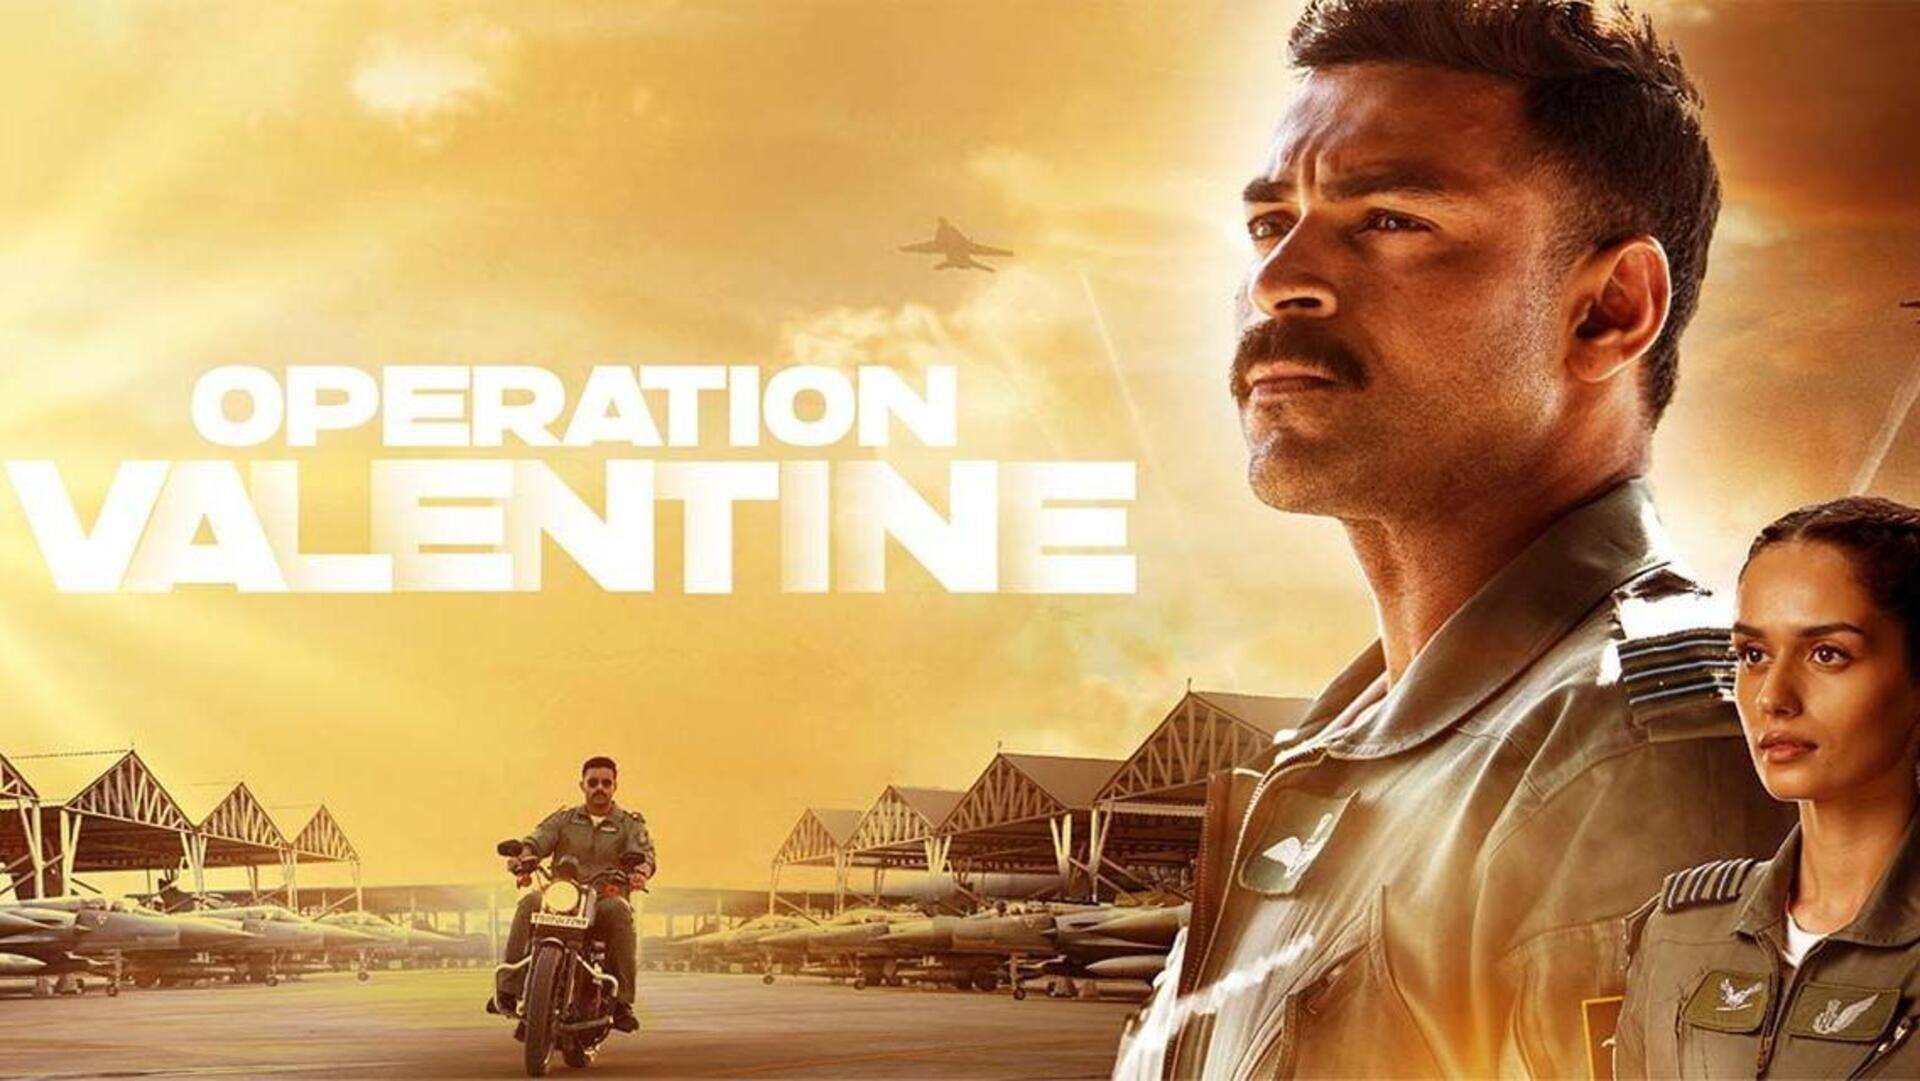 Box office collection: 'Operation Valentine' experiences okayish opening weekend